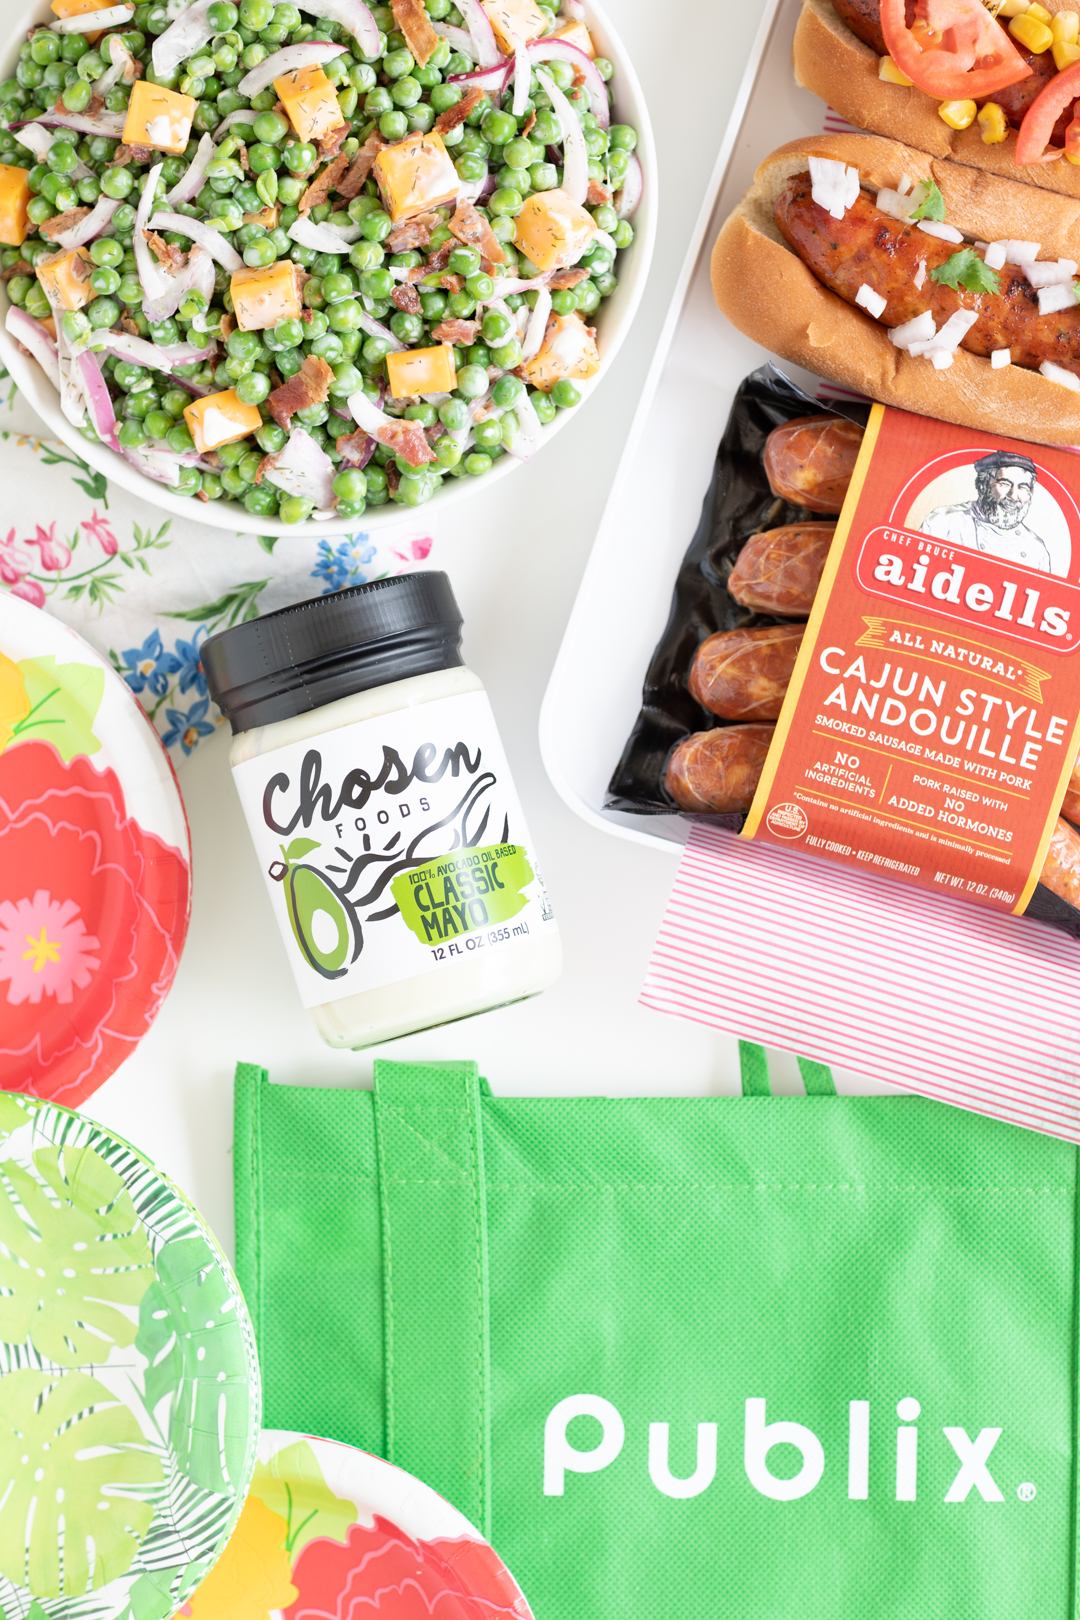 summer celebration ingredients shown along with reusable green publix shopping bag